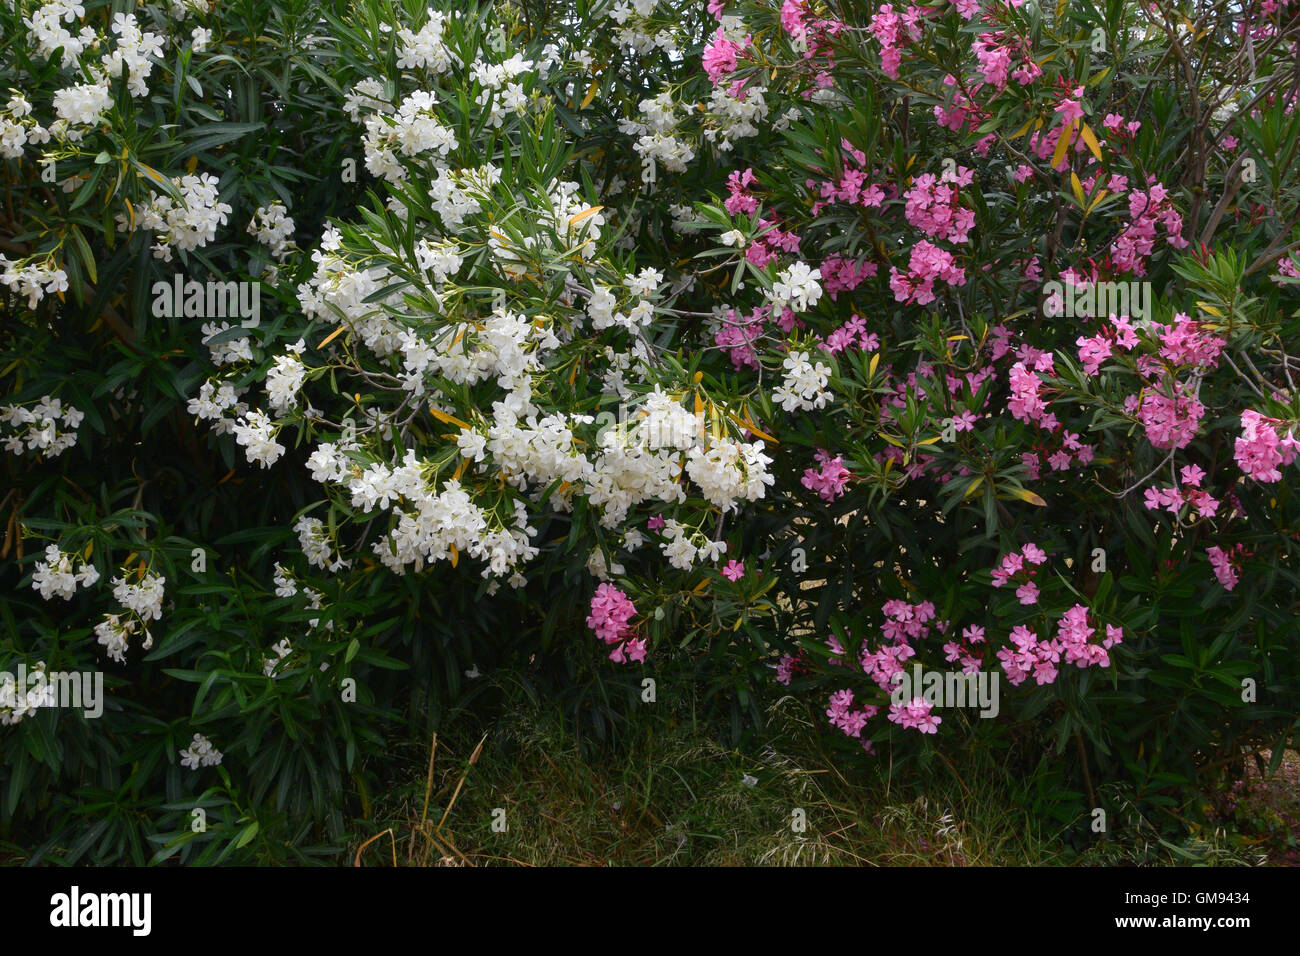 Nerium oleander daphne shrubs with pink and white flowers. Poisonous plant in bloom. Stock Photo